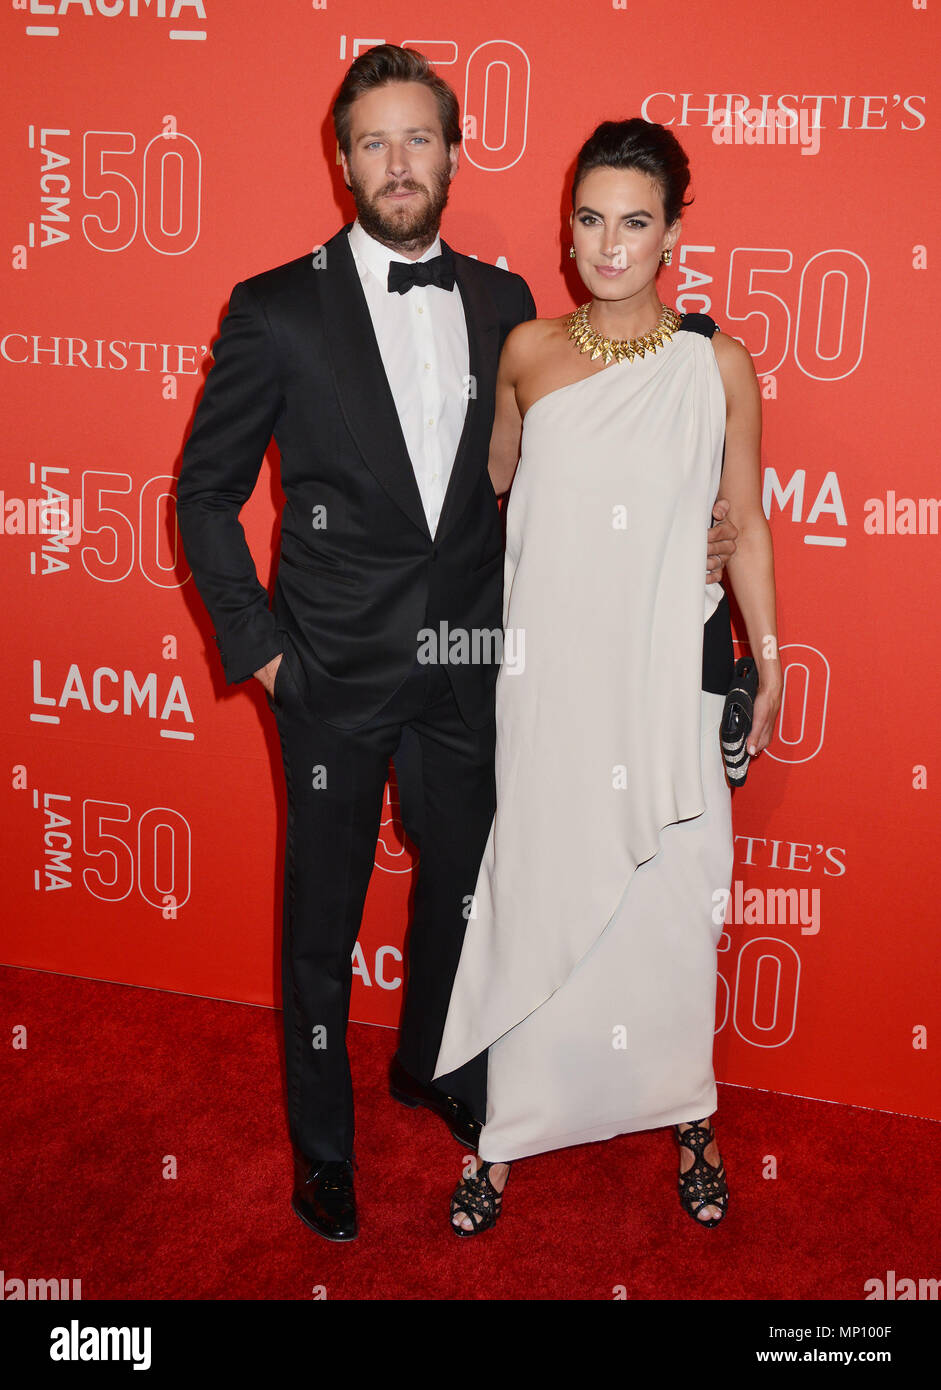 Armie Hammer and Wife Elizabeth Chambers 045 at the  LACMA 50th Ann. Gala 2015 at the LACMA Museum in Los Angeles. April 18, 2015.Armie Hammer and Wife Elizabeth Chambers 045 ------------- Red Carpet Event, Vertical, USA, Film Industry, Celebrities,  Photography, Bestof, Arts Culture and Entertainment, Topix Celebrities fashion /  Vertical, Best of, Event in Hollywood Life - California,  Red Carpet and backstage, USA, Film Industry, Celebrities,  movie celebrities, TV celebrities, Music celebrities, Photography, Bestof, Arts Culture and Entertainment,  Topix, vertical,  family from from the ye Stock Photo